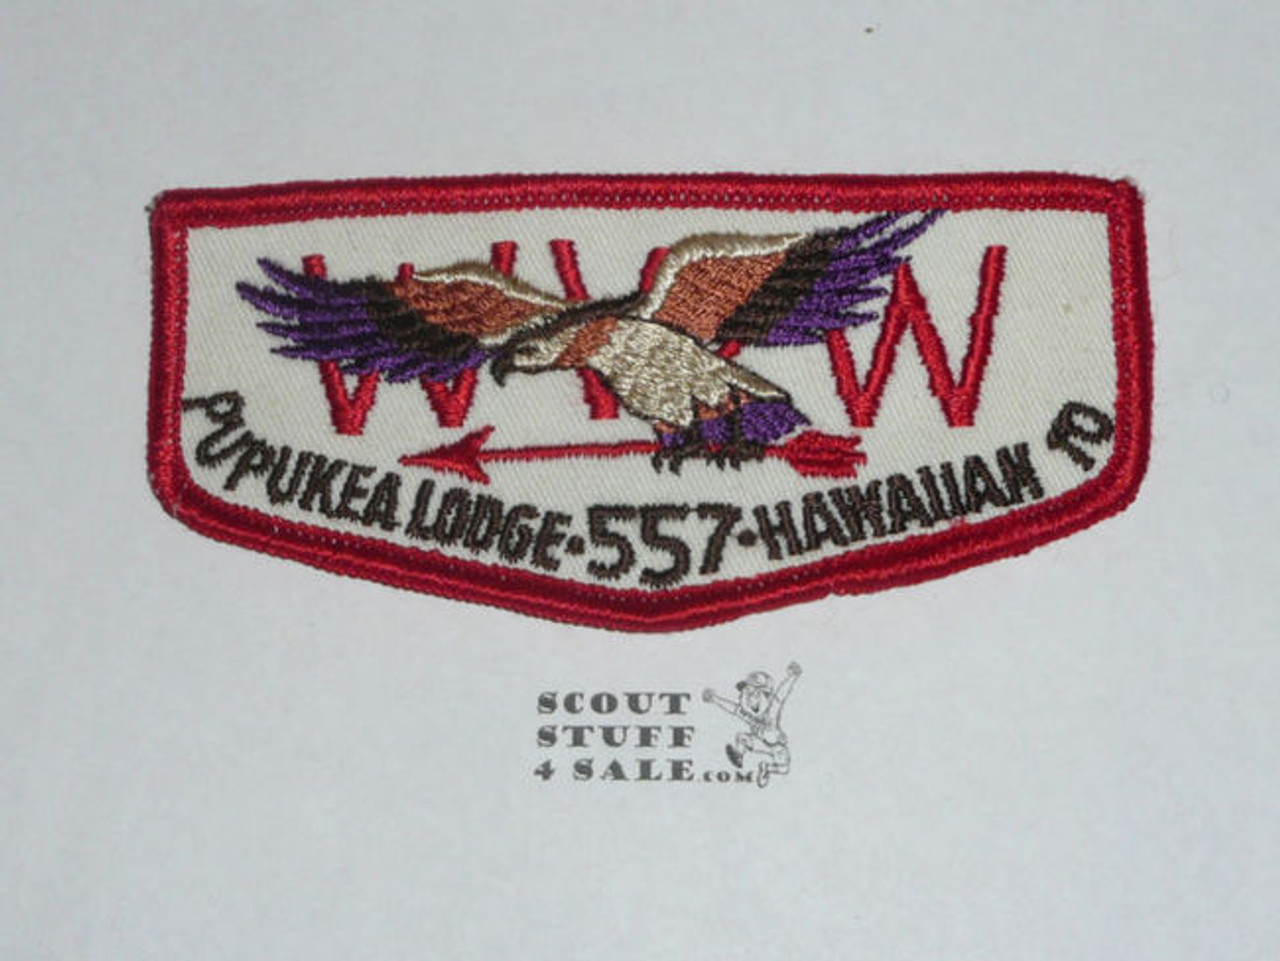 Order of the Arrow Lodge #557 Pupukea f4 Flap Patch